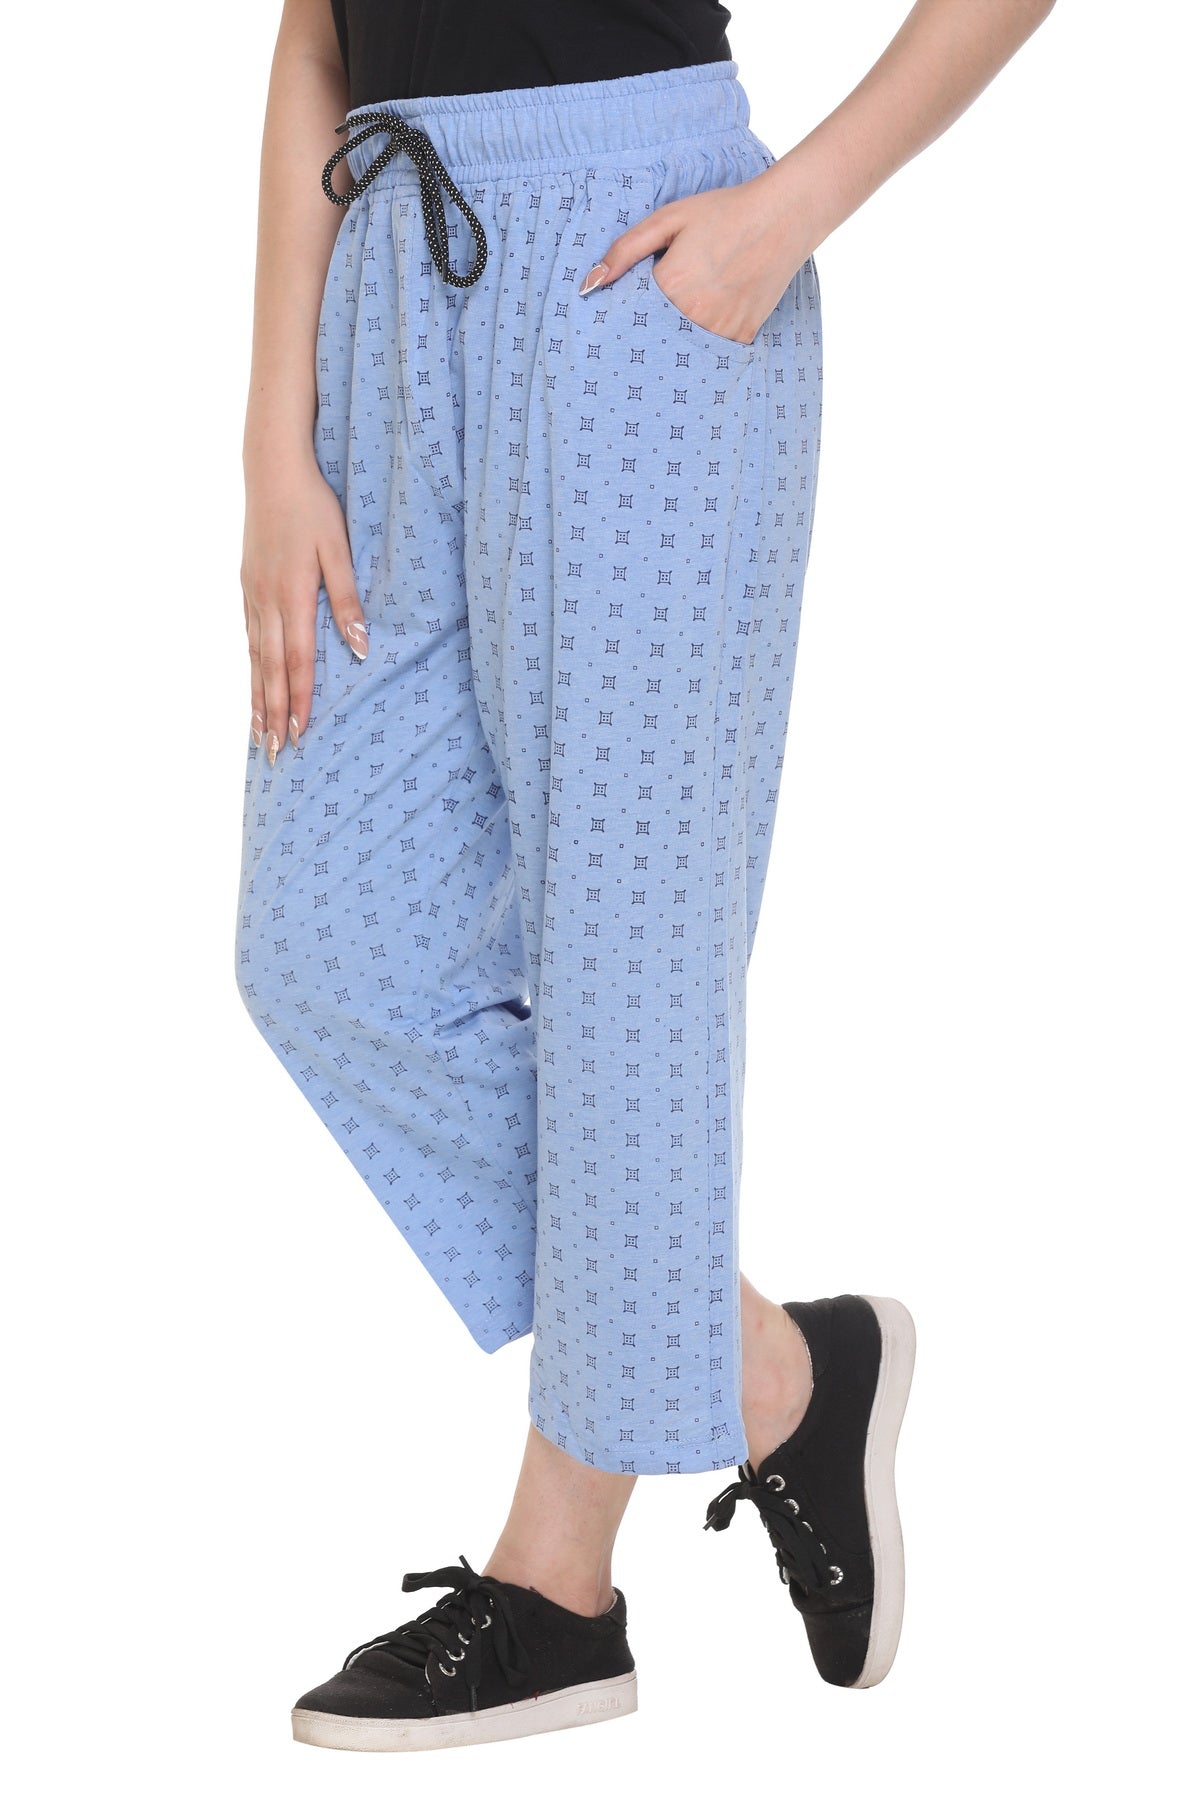 Stylish Sky Blue Printed Cotton Plus Size Capri For Women Online In India